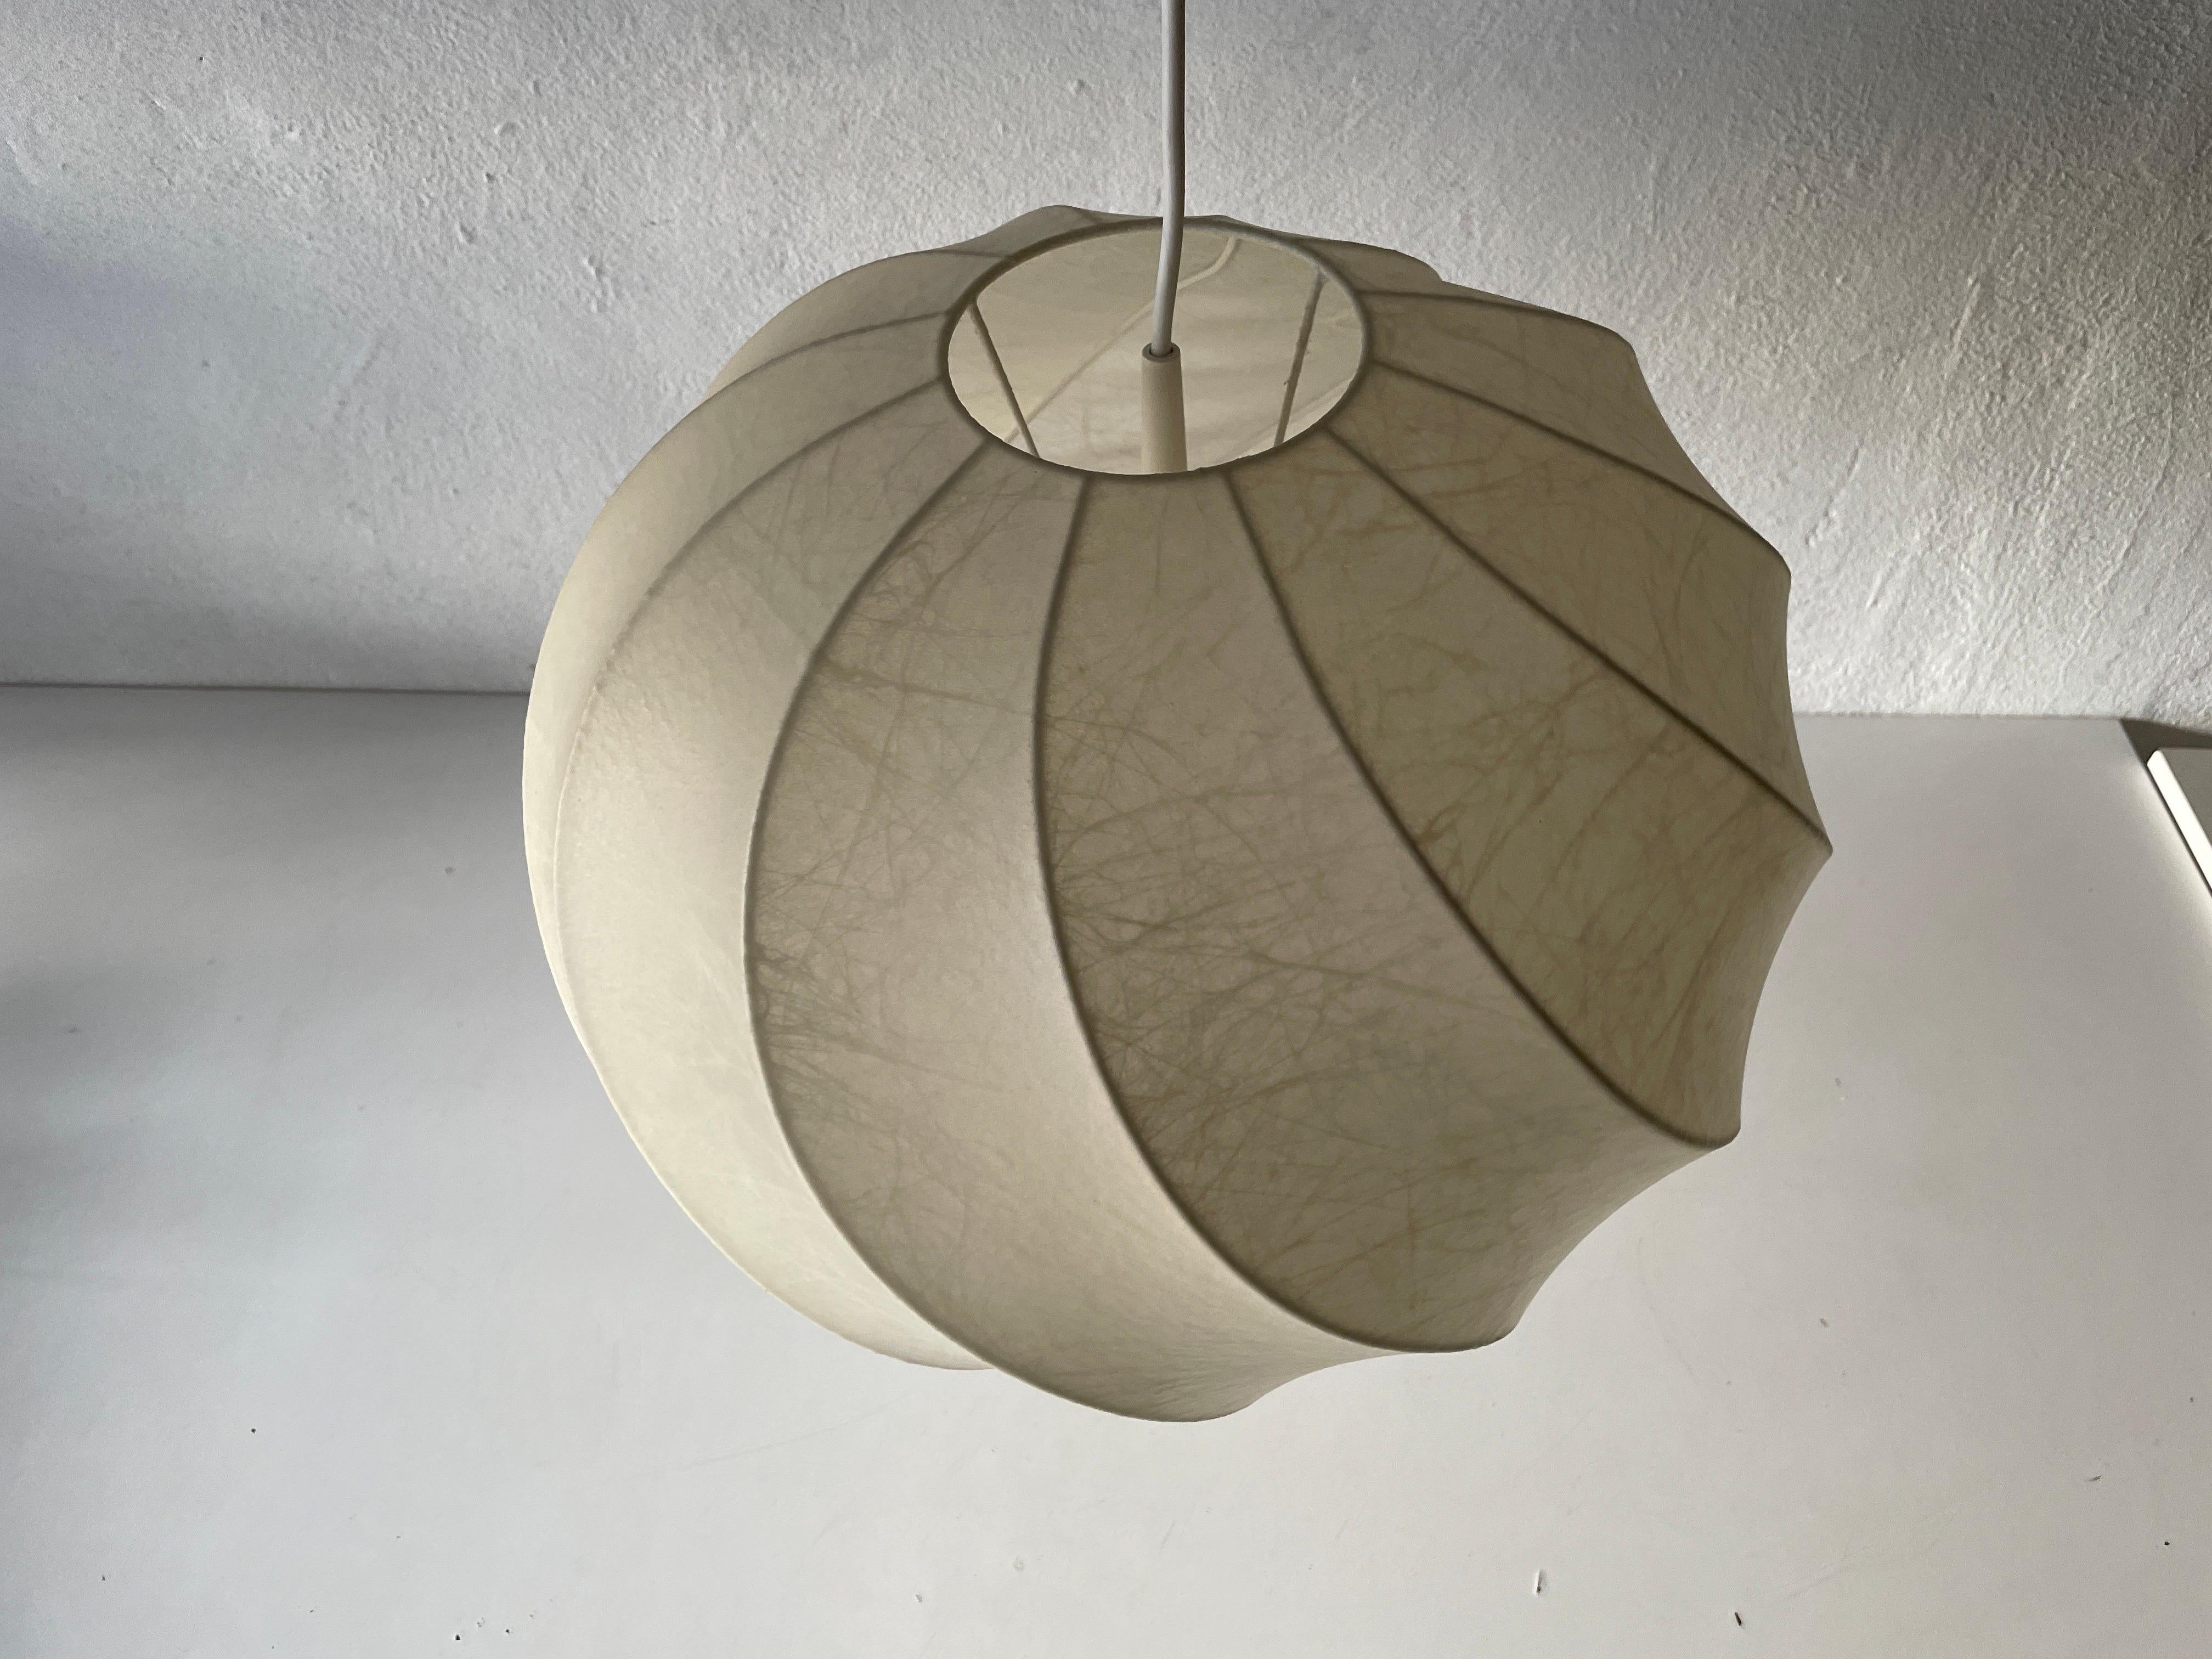 Cocoon pendant lamp by Goldkant, 1960s, Germany

Achille Castiglioni Era
1960s Germany.

Lampshade is in very good vintage condition.

This lamp works with E27 light bulbs. 
Wired and suitable to use with 220V and 110V for all